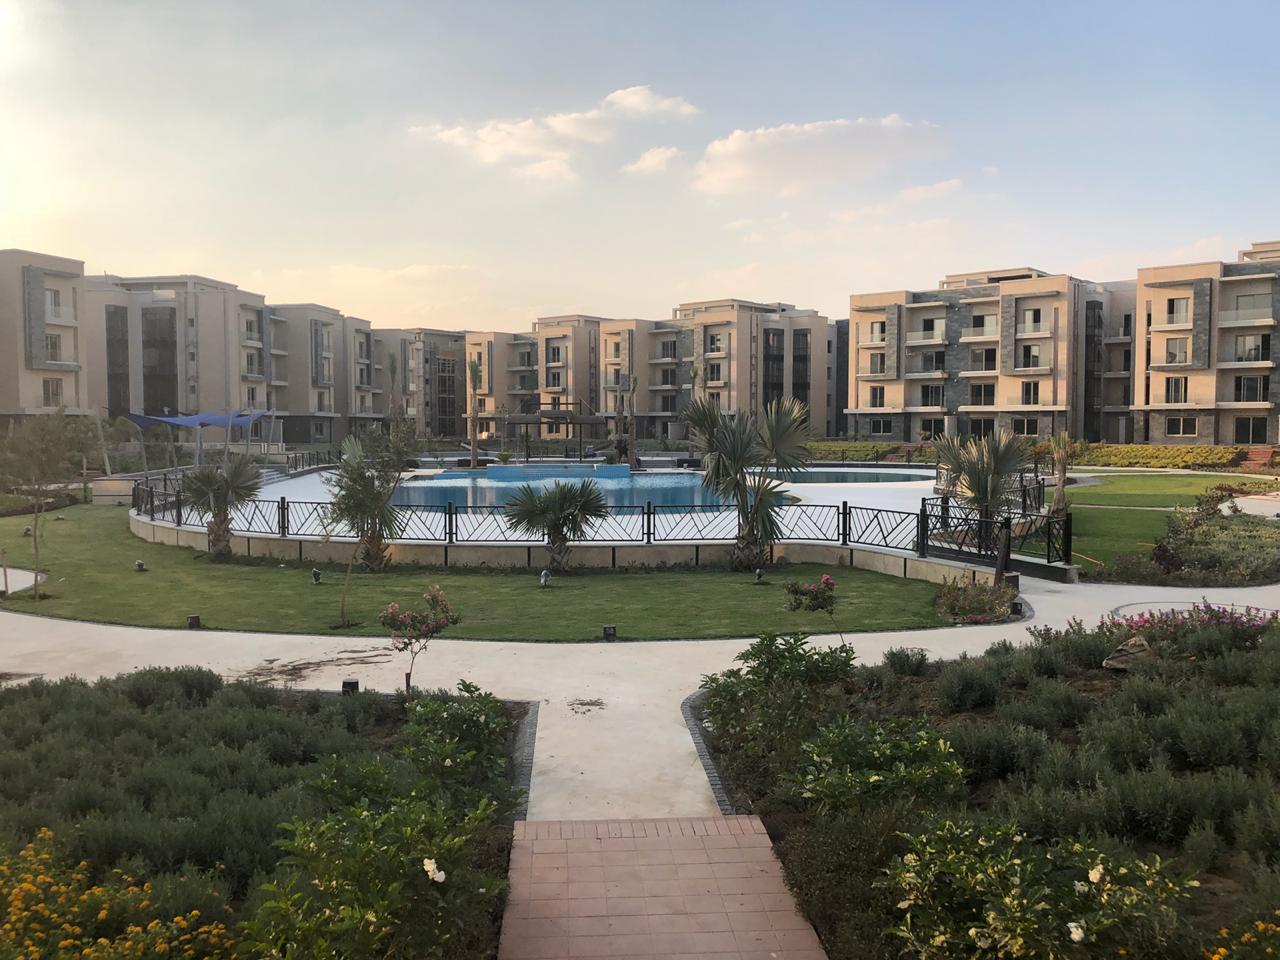 3 bedroom apartments for sale in Galleria Moon Valley Compound 161 m²